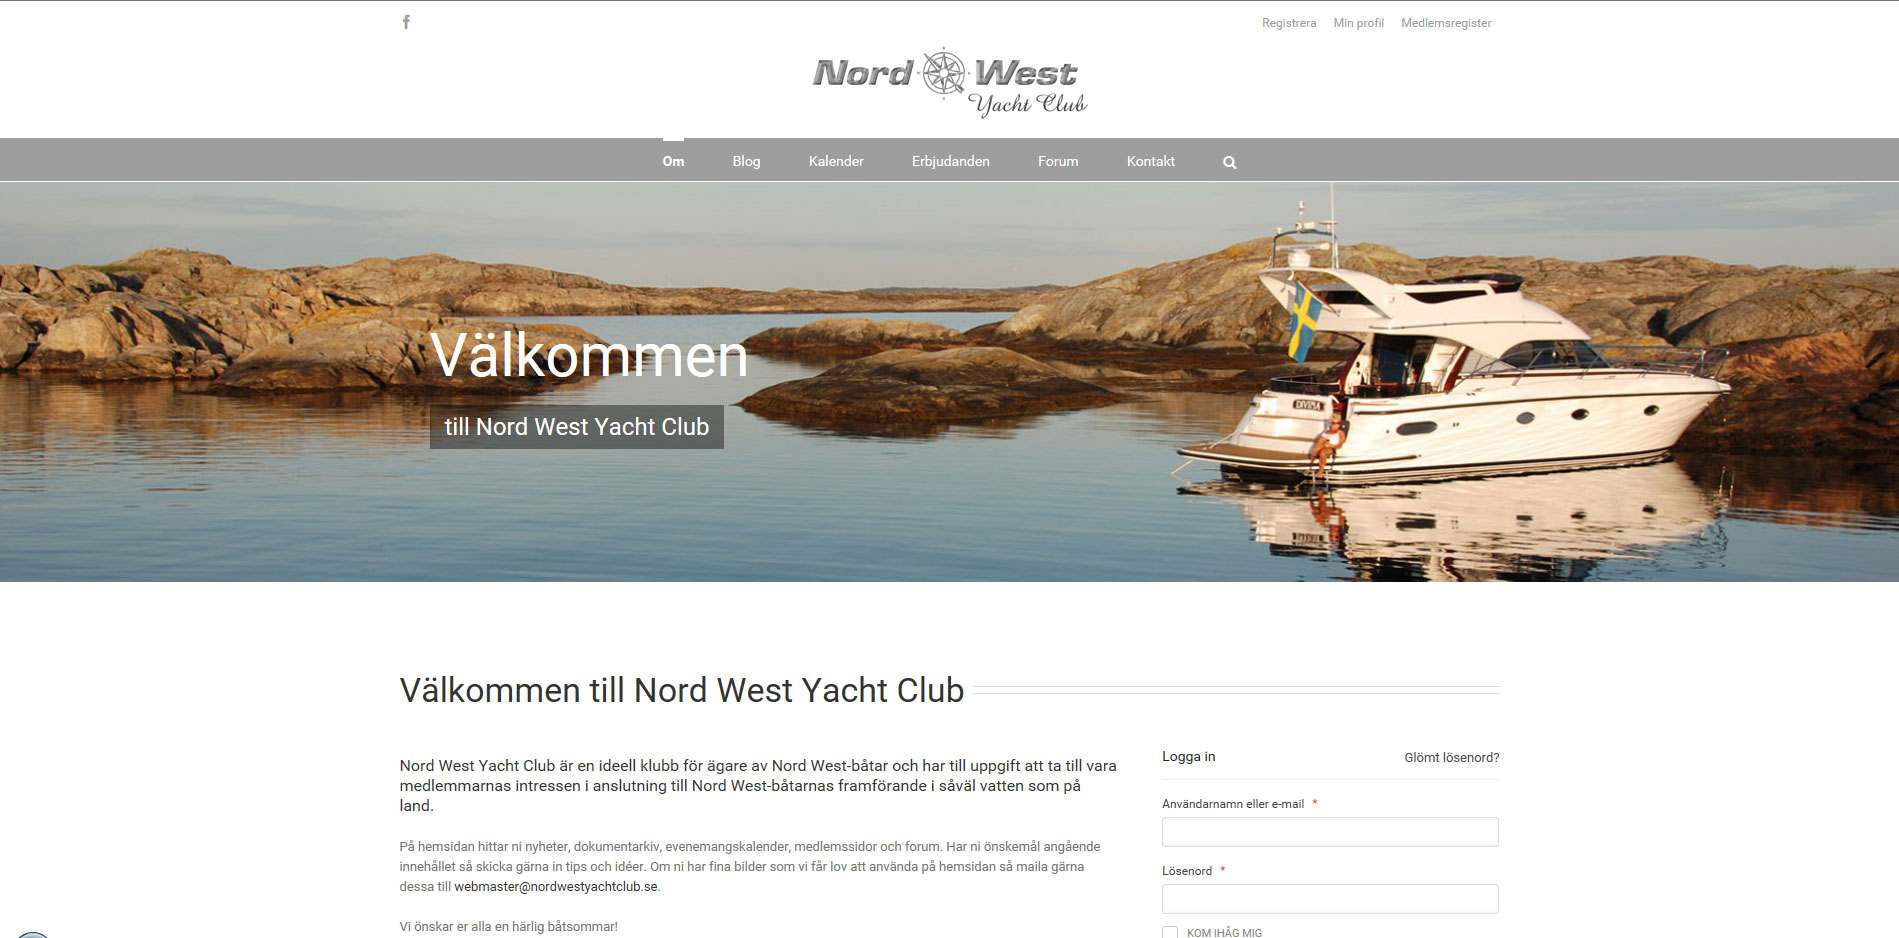 New website for Nord West Yacht Club